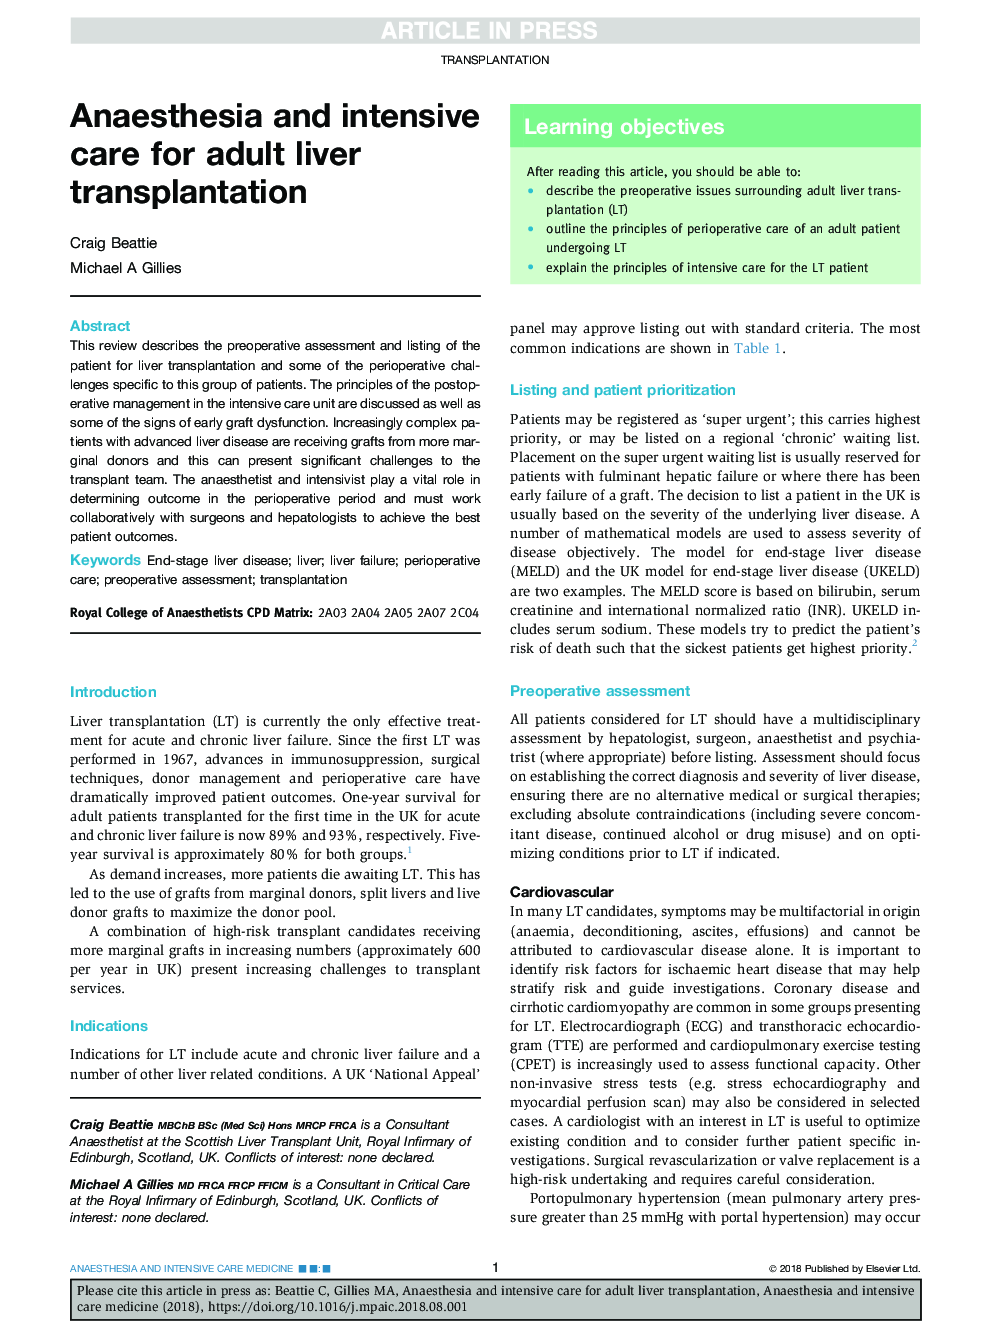 Anaesthesia and intensive care for adult liver transplantation